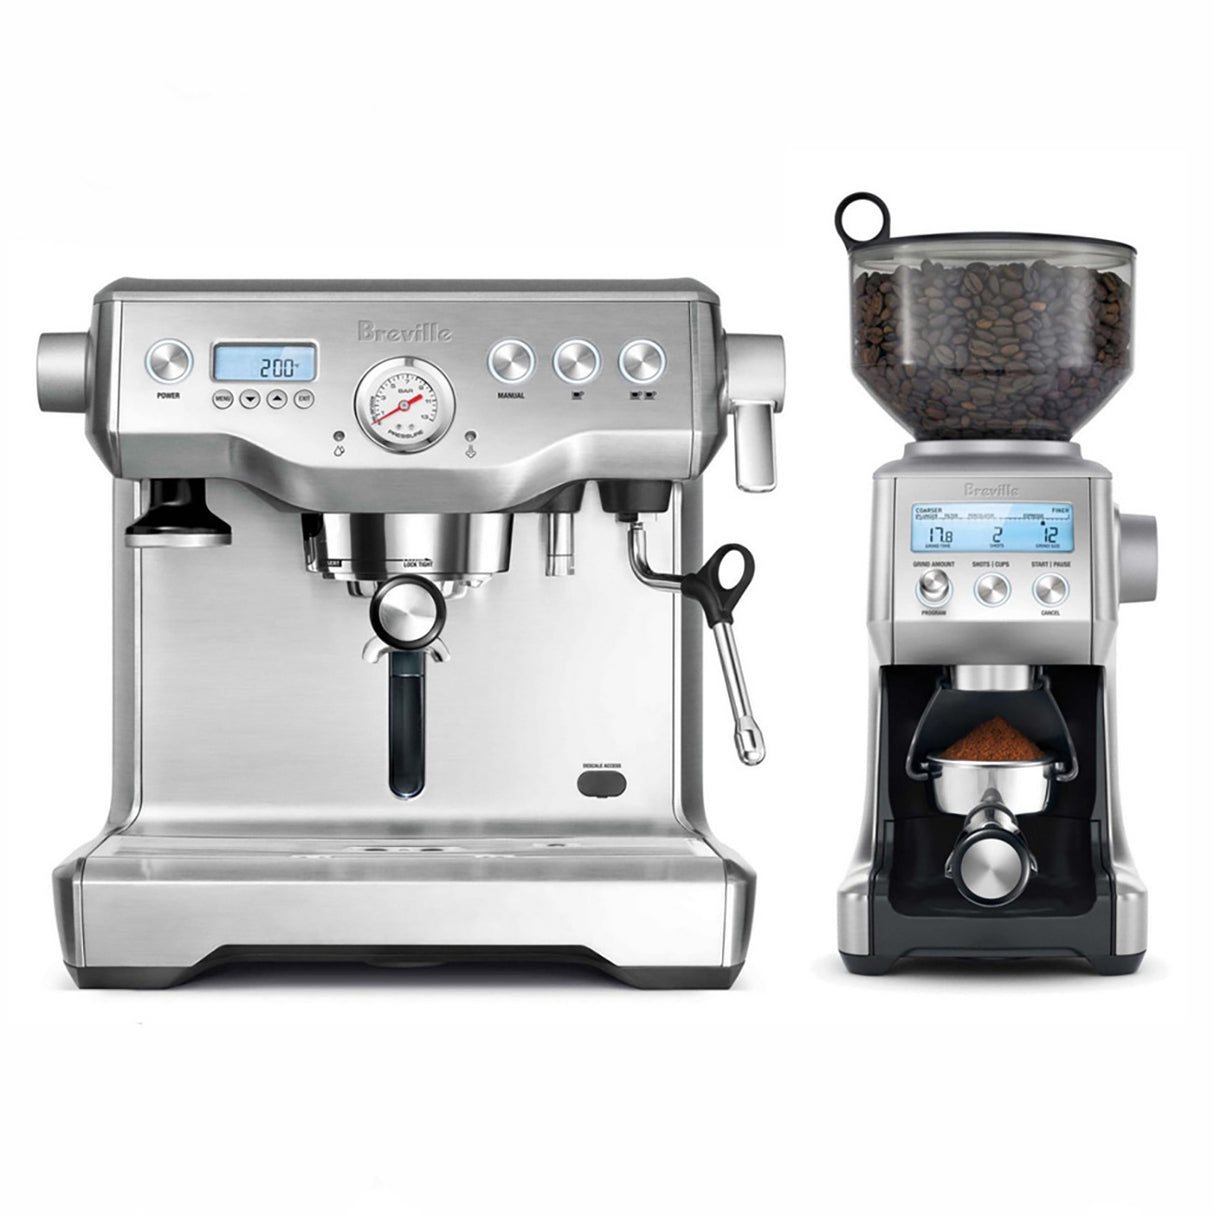 Breville the Dynamic Duo